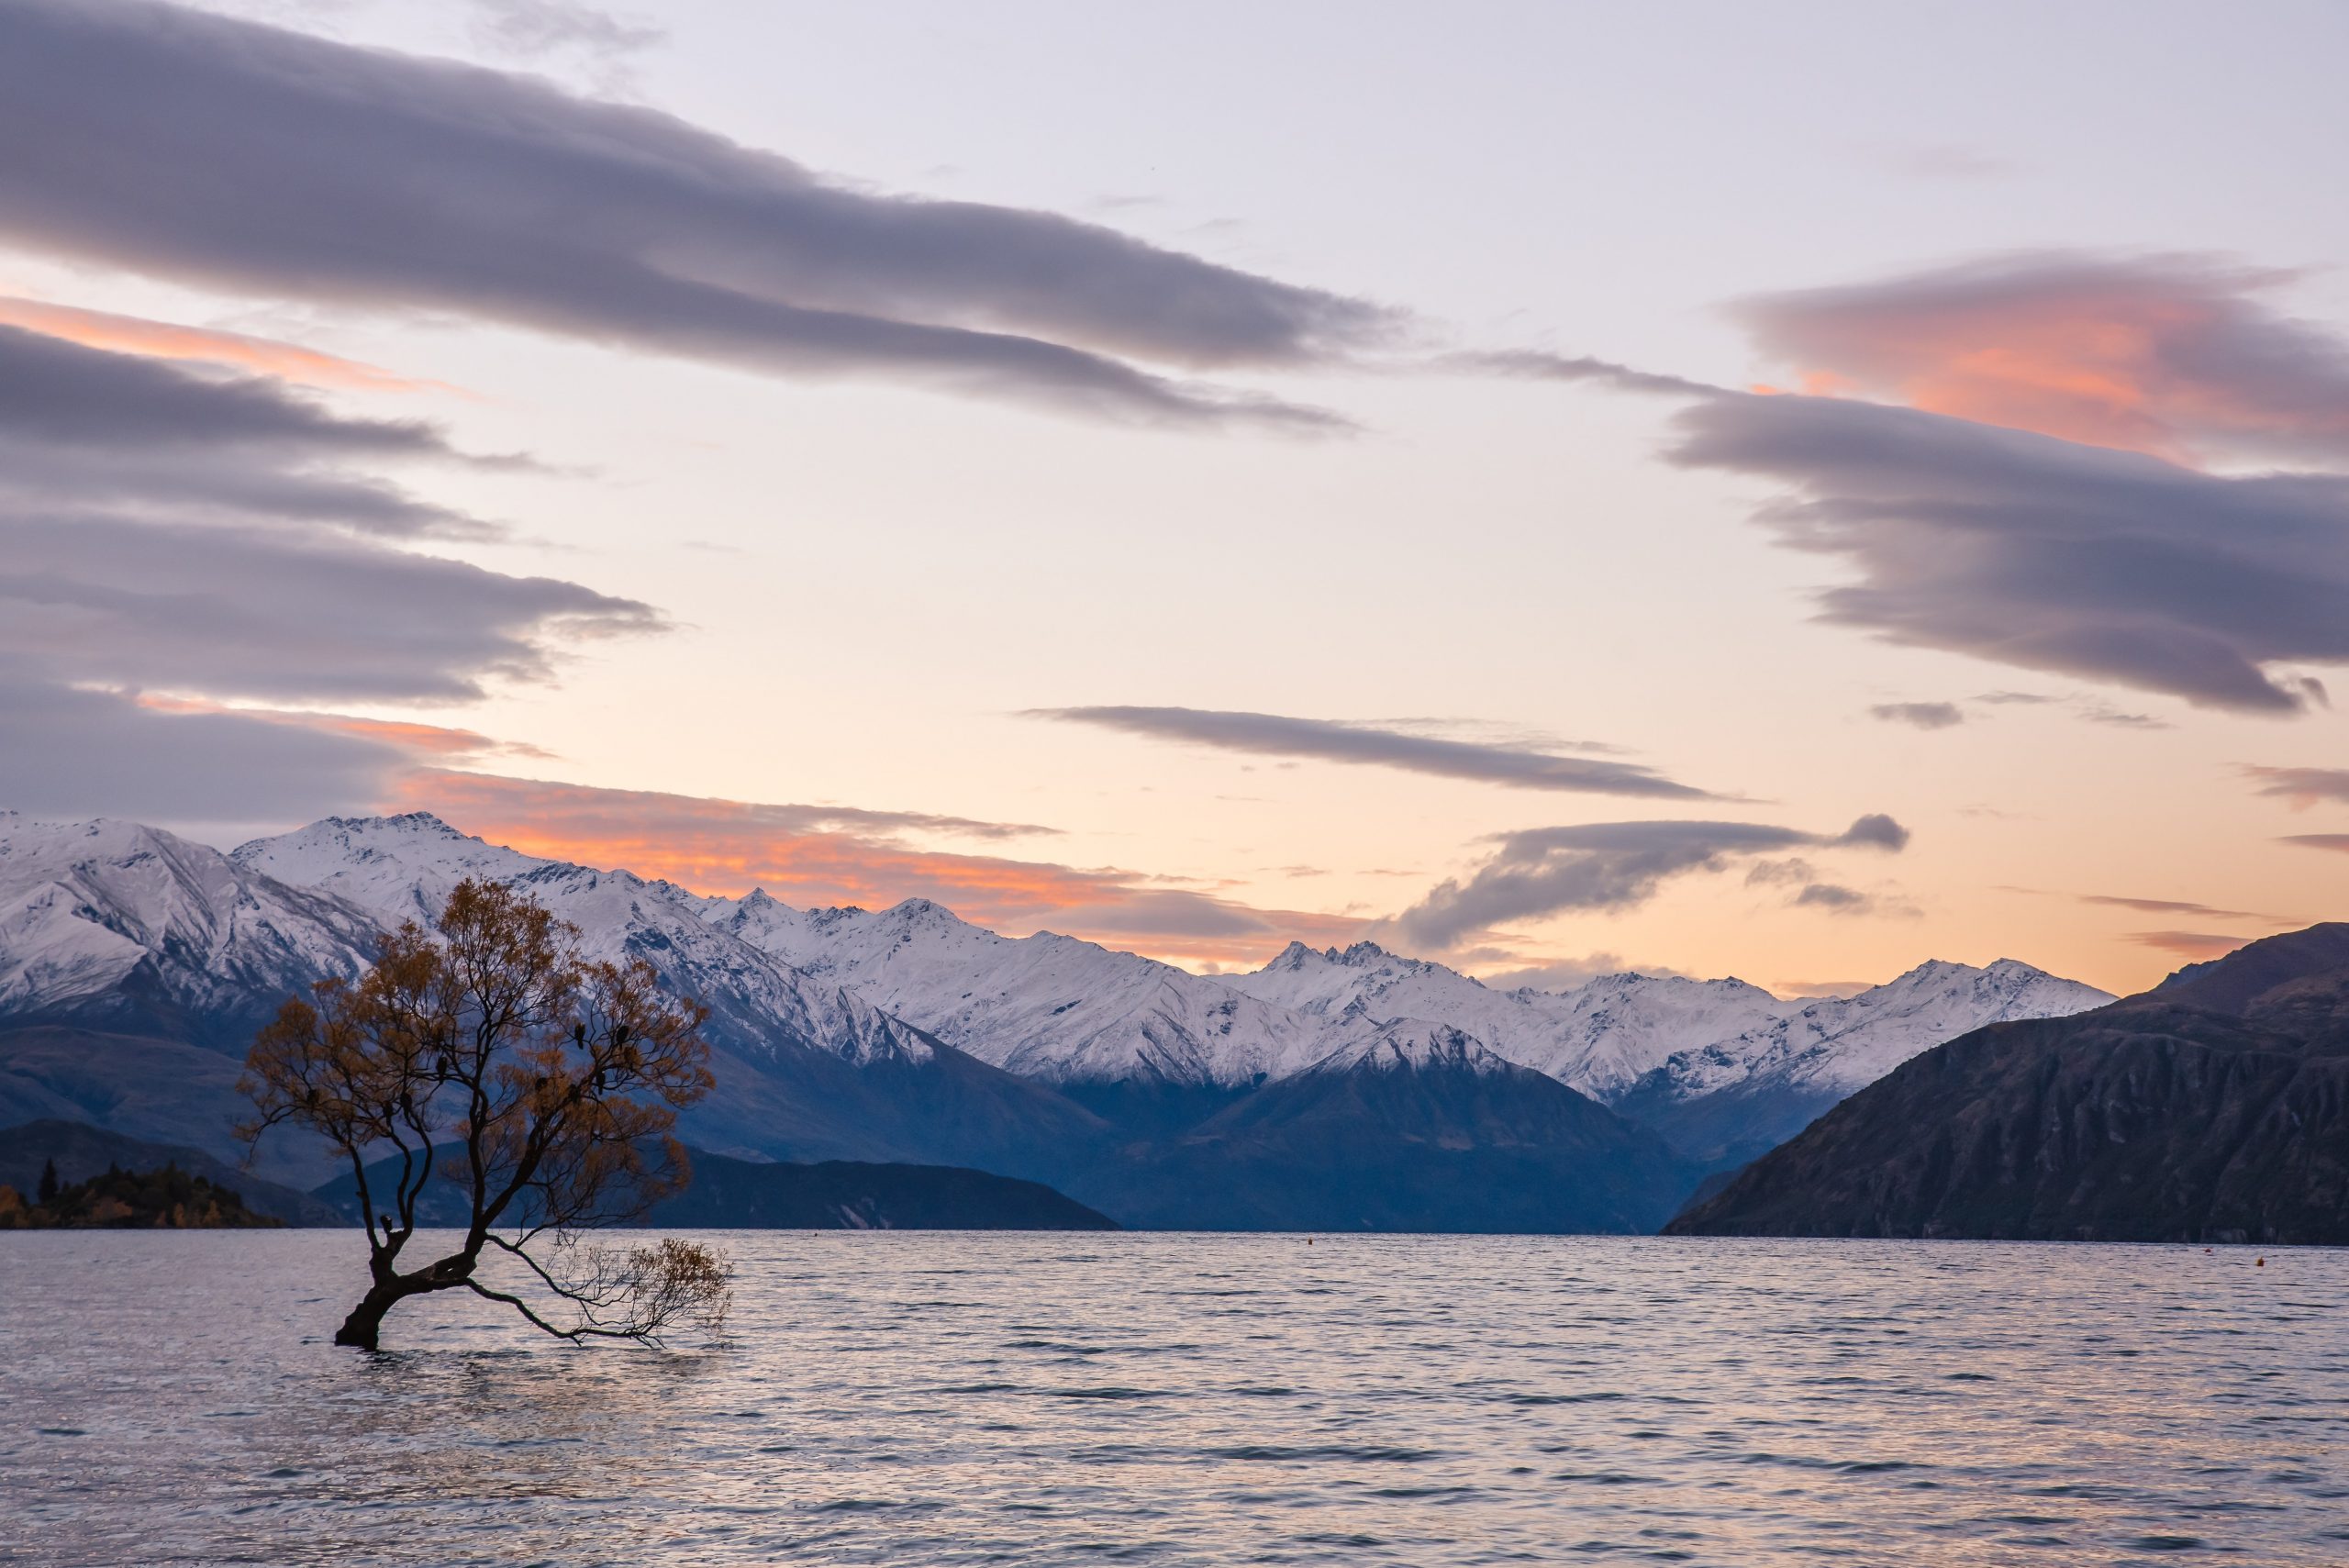 A tree with yellow leaves in the middle of a lake with snow-capped mountains in the distance.